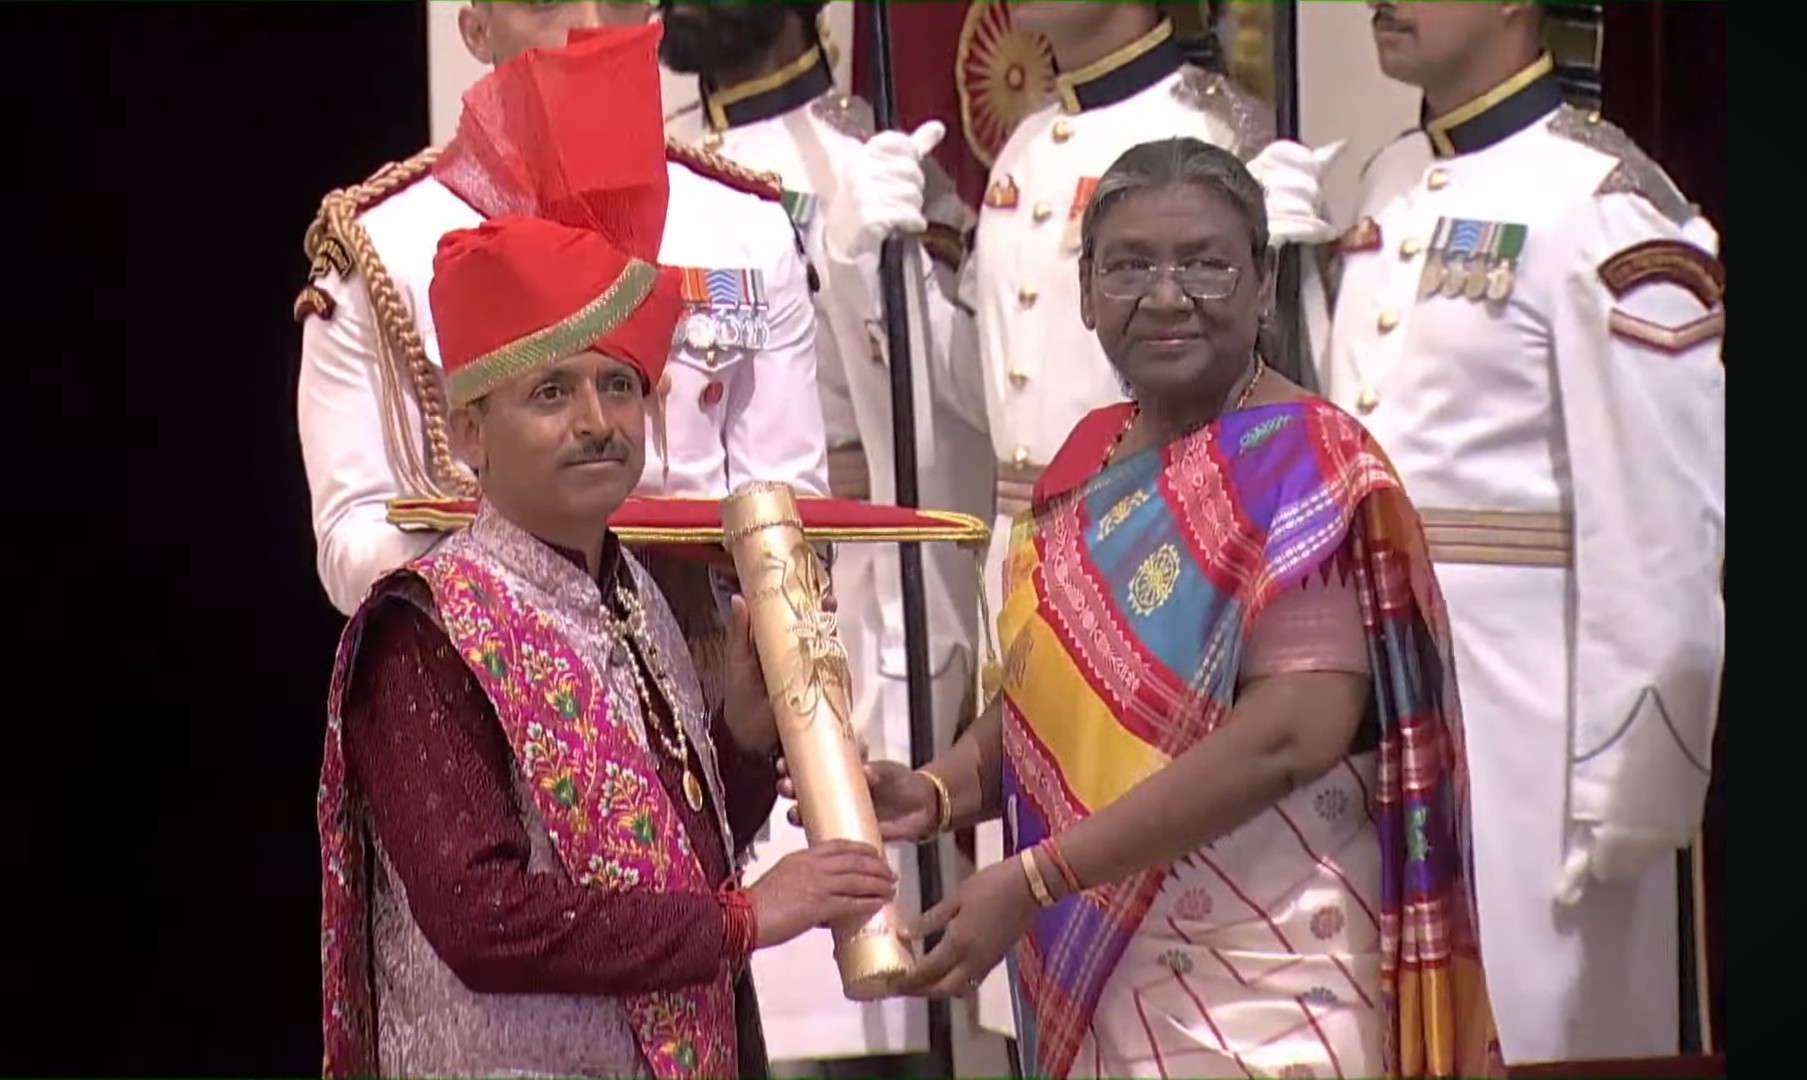 'The President of India confers Padma Shri to Shri Romalo Ram of Jammu & Kashmir in the field of Art during the Civil Investiture Ceremony'